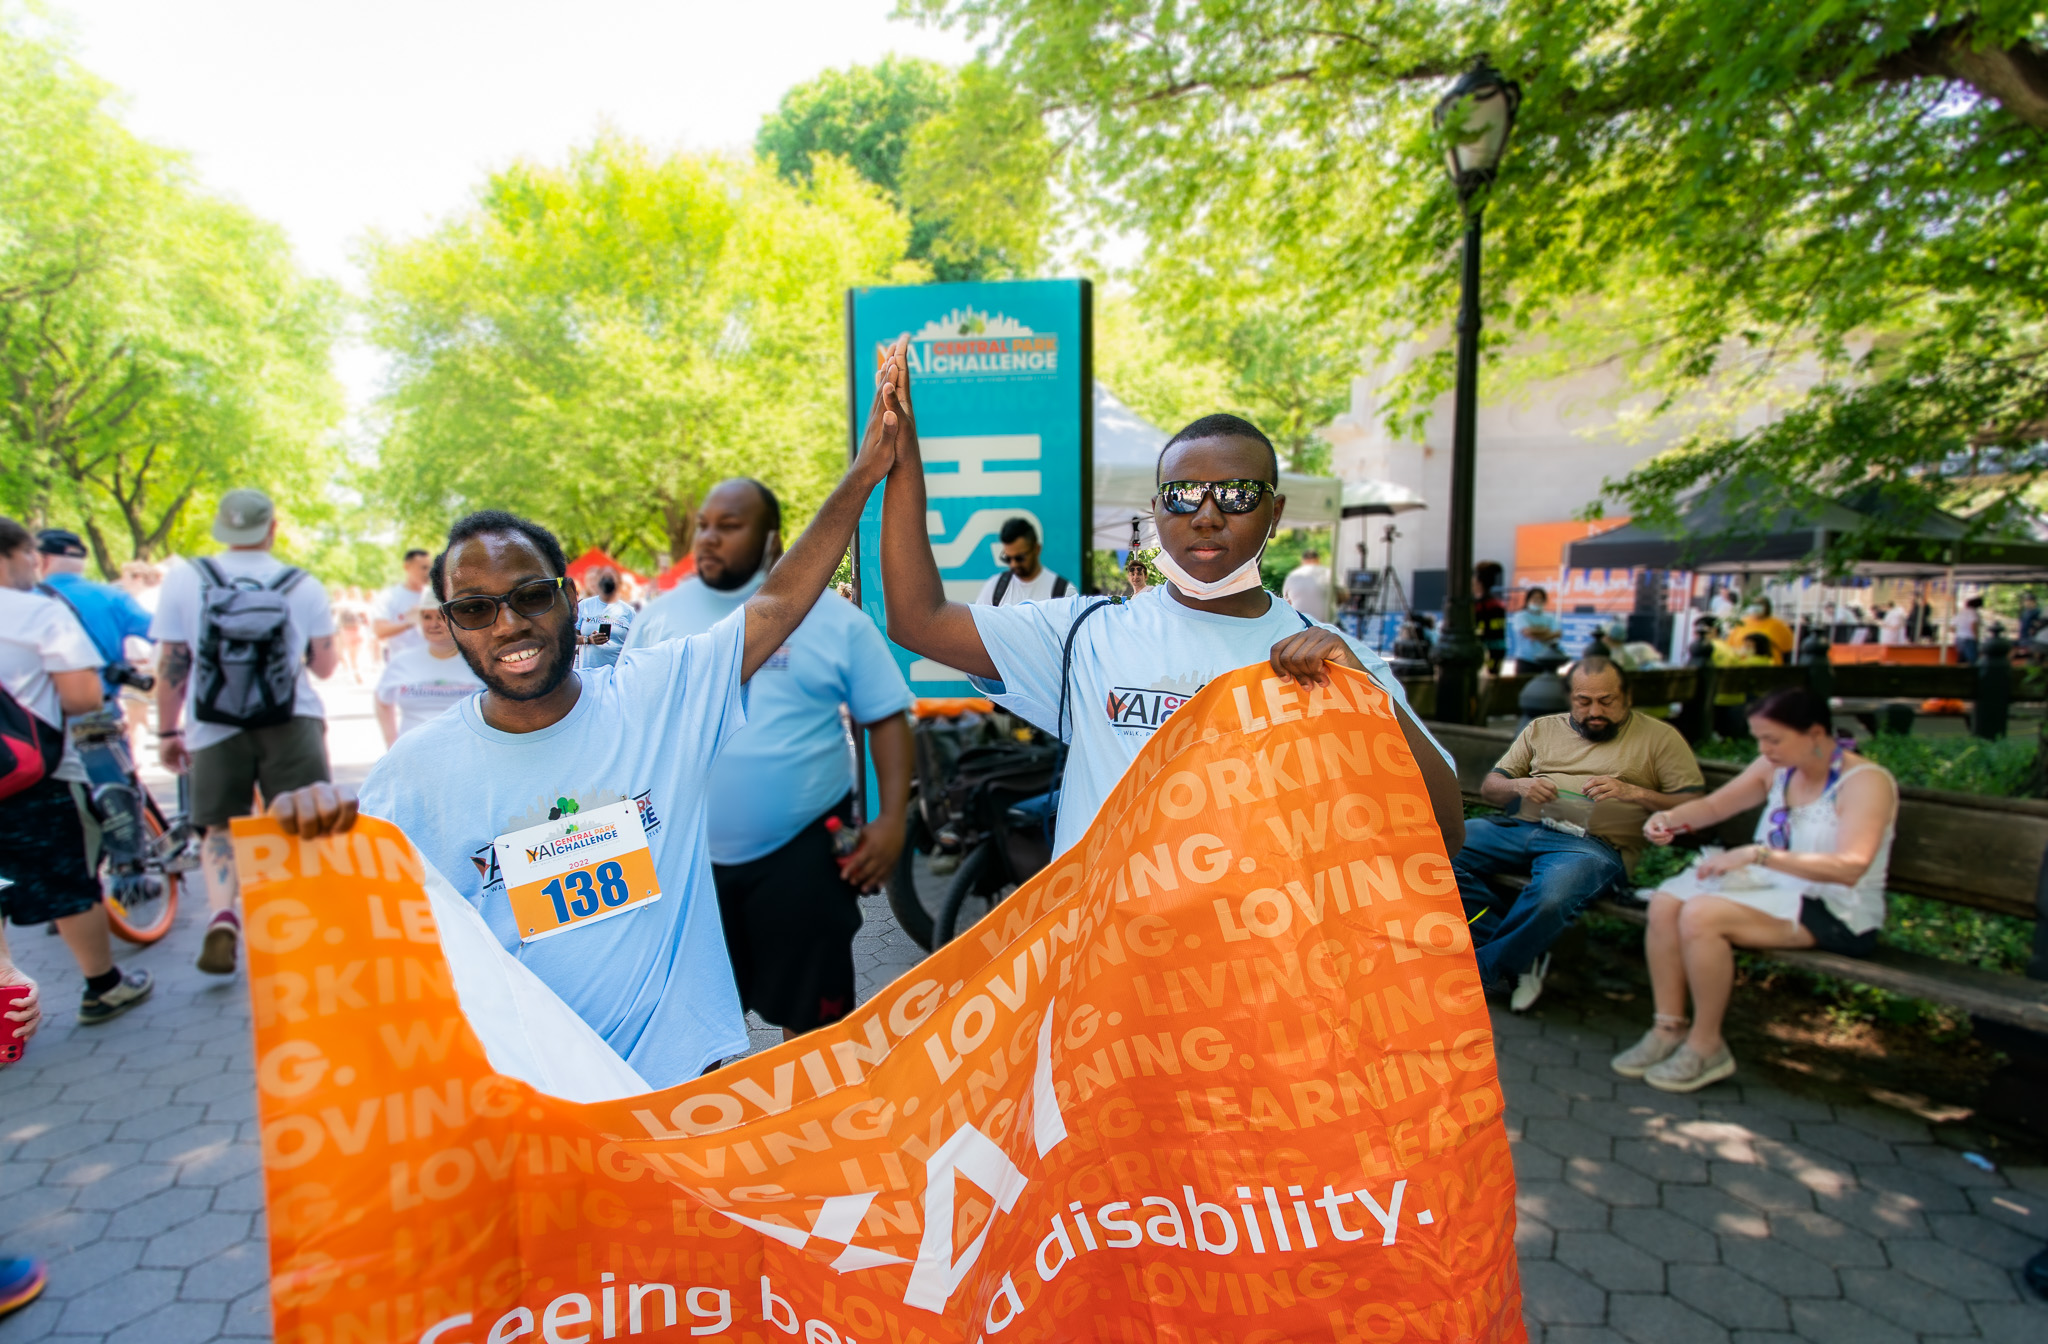 Neurodiversity Takes Center Stage at Central Park Challenge